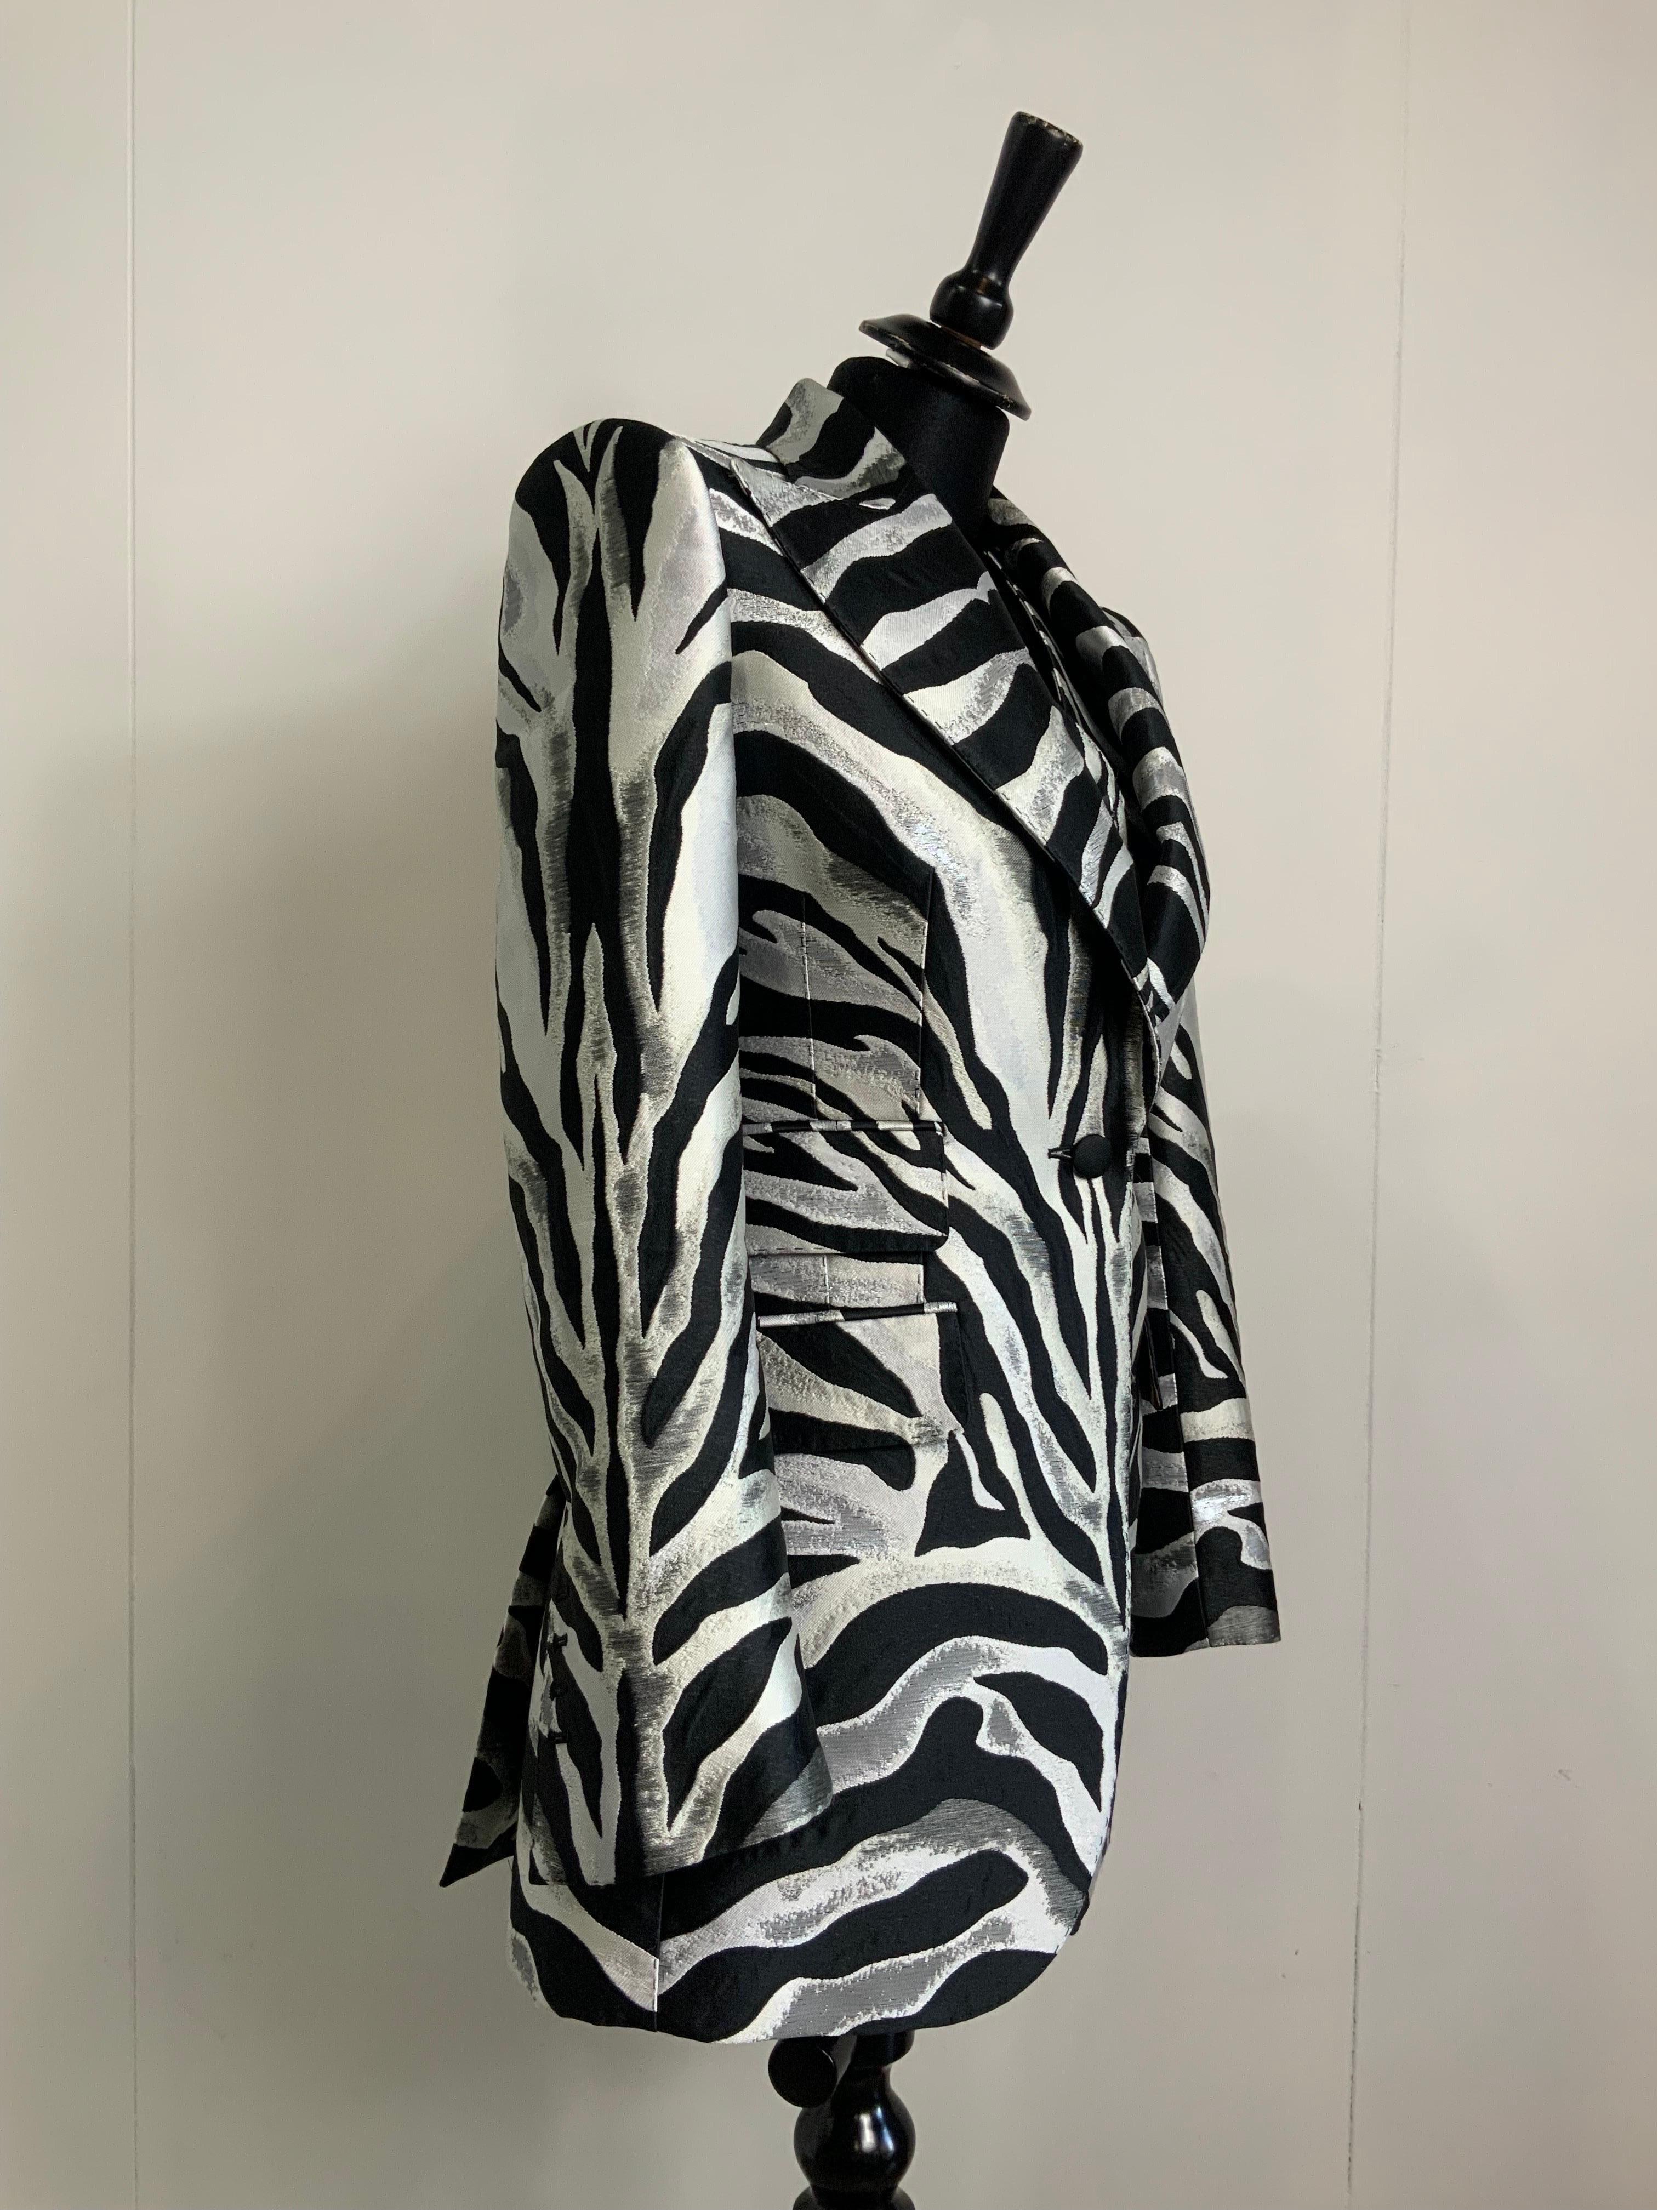 Dolce and Gabbana Spring 22 Zebra Jacket + Vest  In Excellent Condition For Sale In Carnate, IT